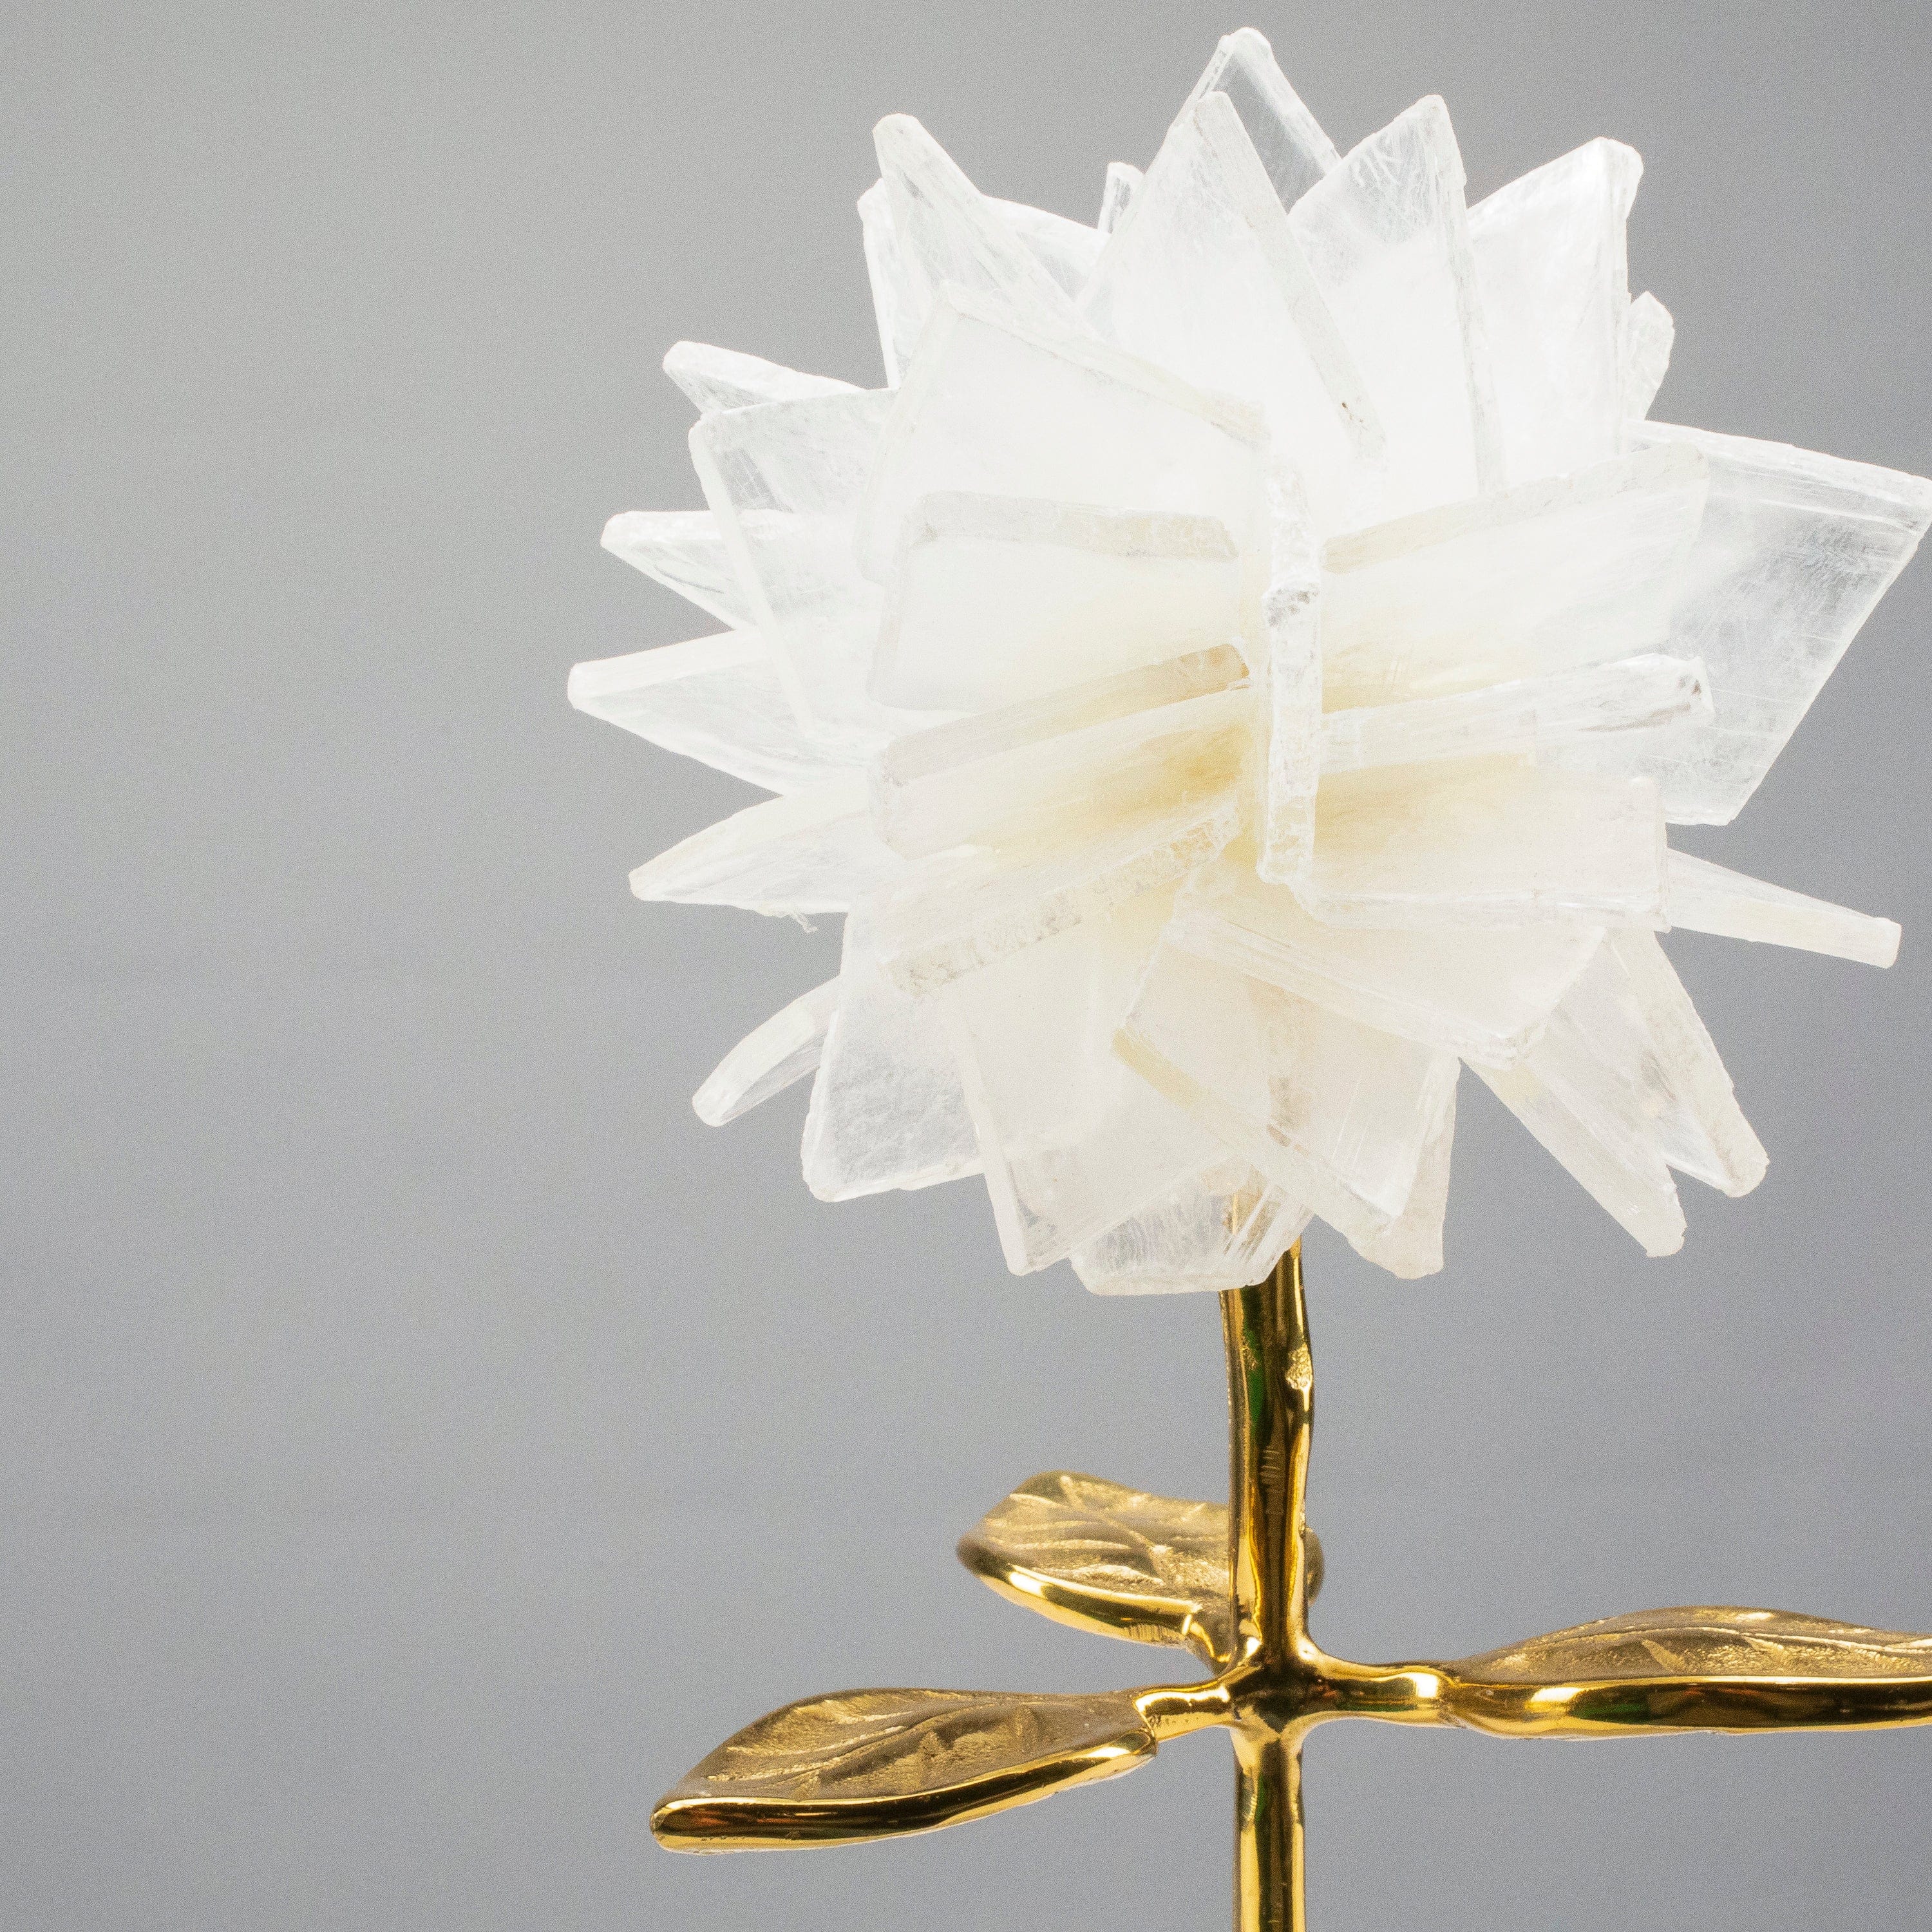 KALIFANO Crystal Home Decor Calcite Flower with Brass Stem on Agate Base HG638B-SL